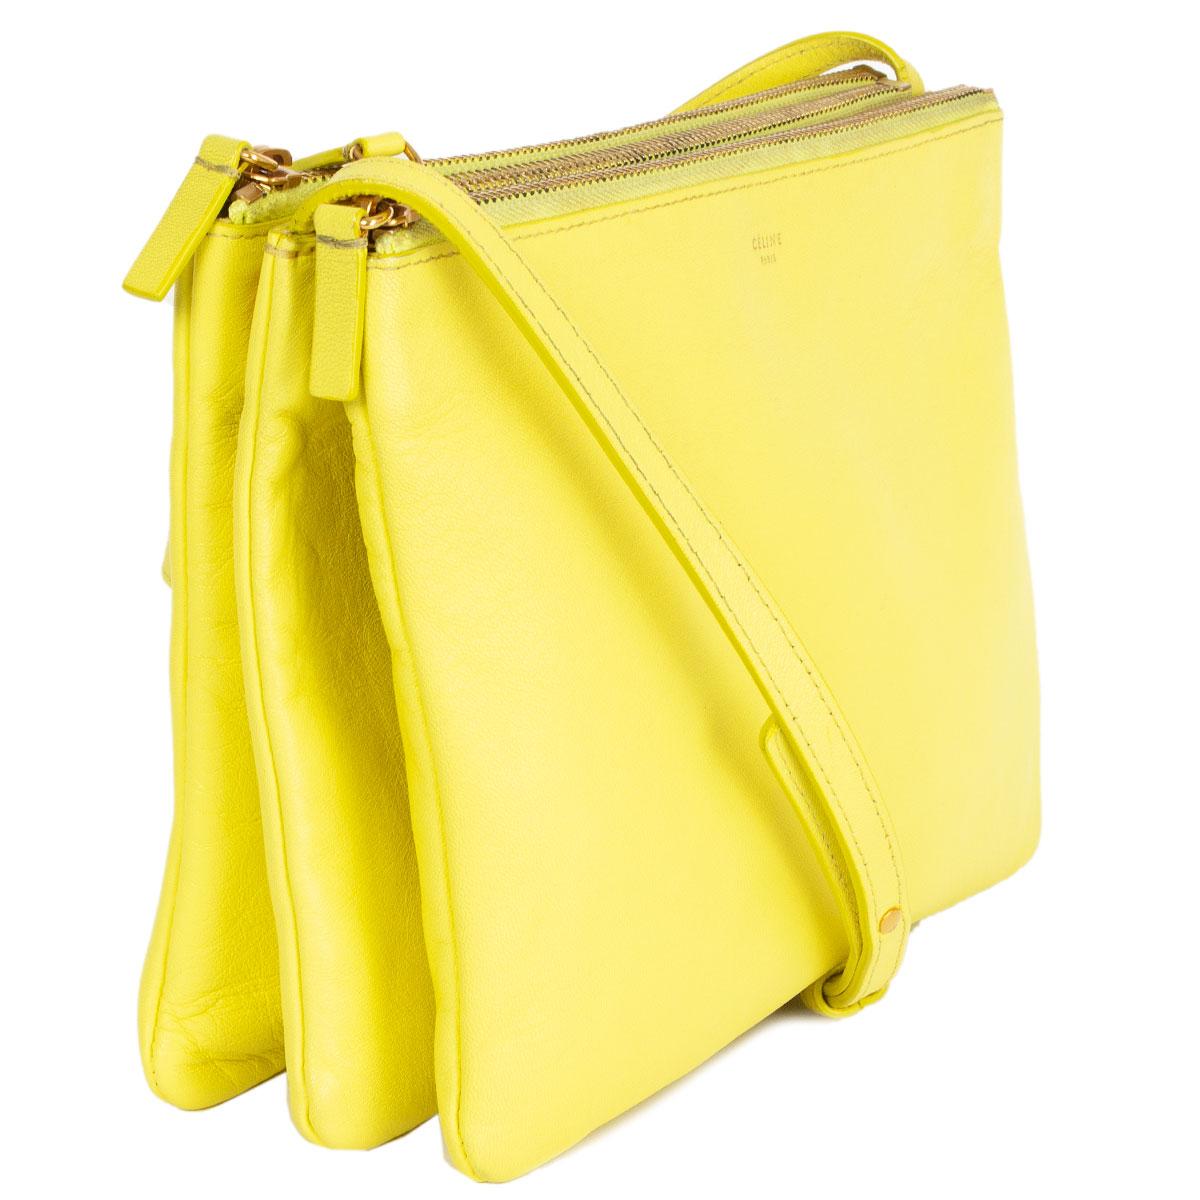 100% authentic Céline Trio Large shoulder bag in fluo yellow lambskin. Can be carried cross-body or on your shoulder. Three separate zipper compartments attached together with snap-buttons. Lined in grey jersey. Can be carried as a clutch by